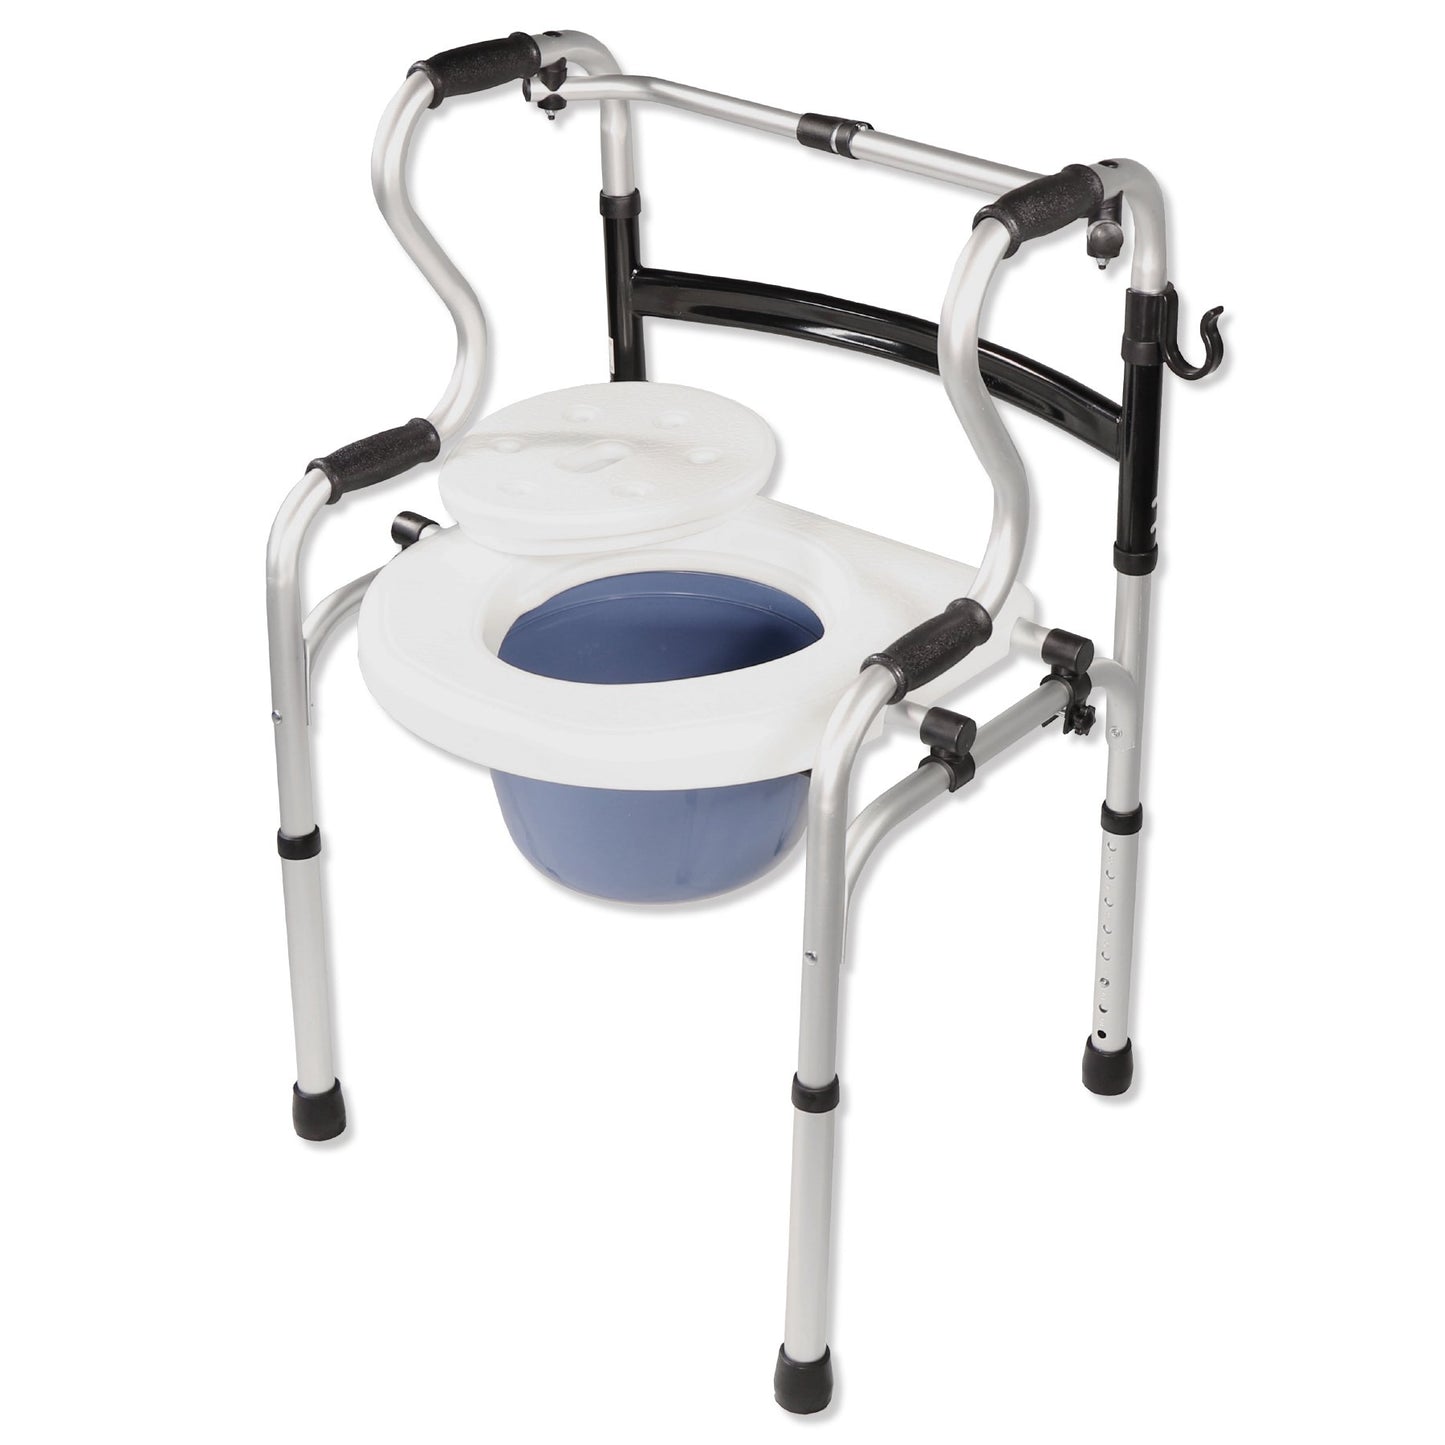 PCP™ 5-in-1 Mobility and Bathroom Aid